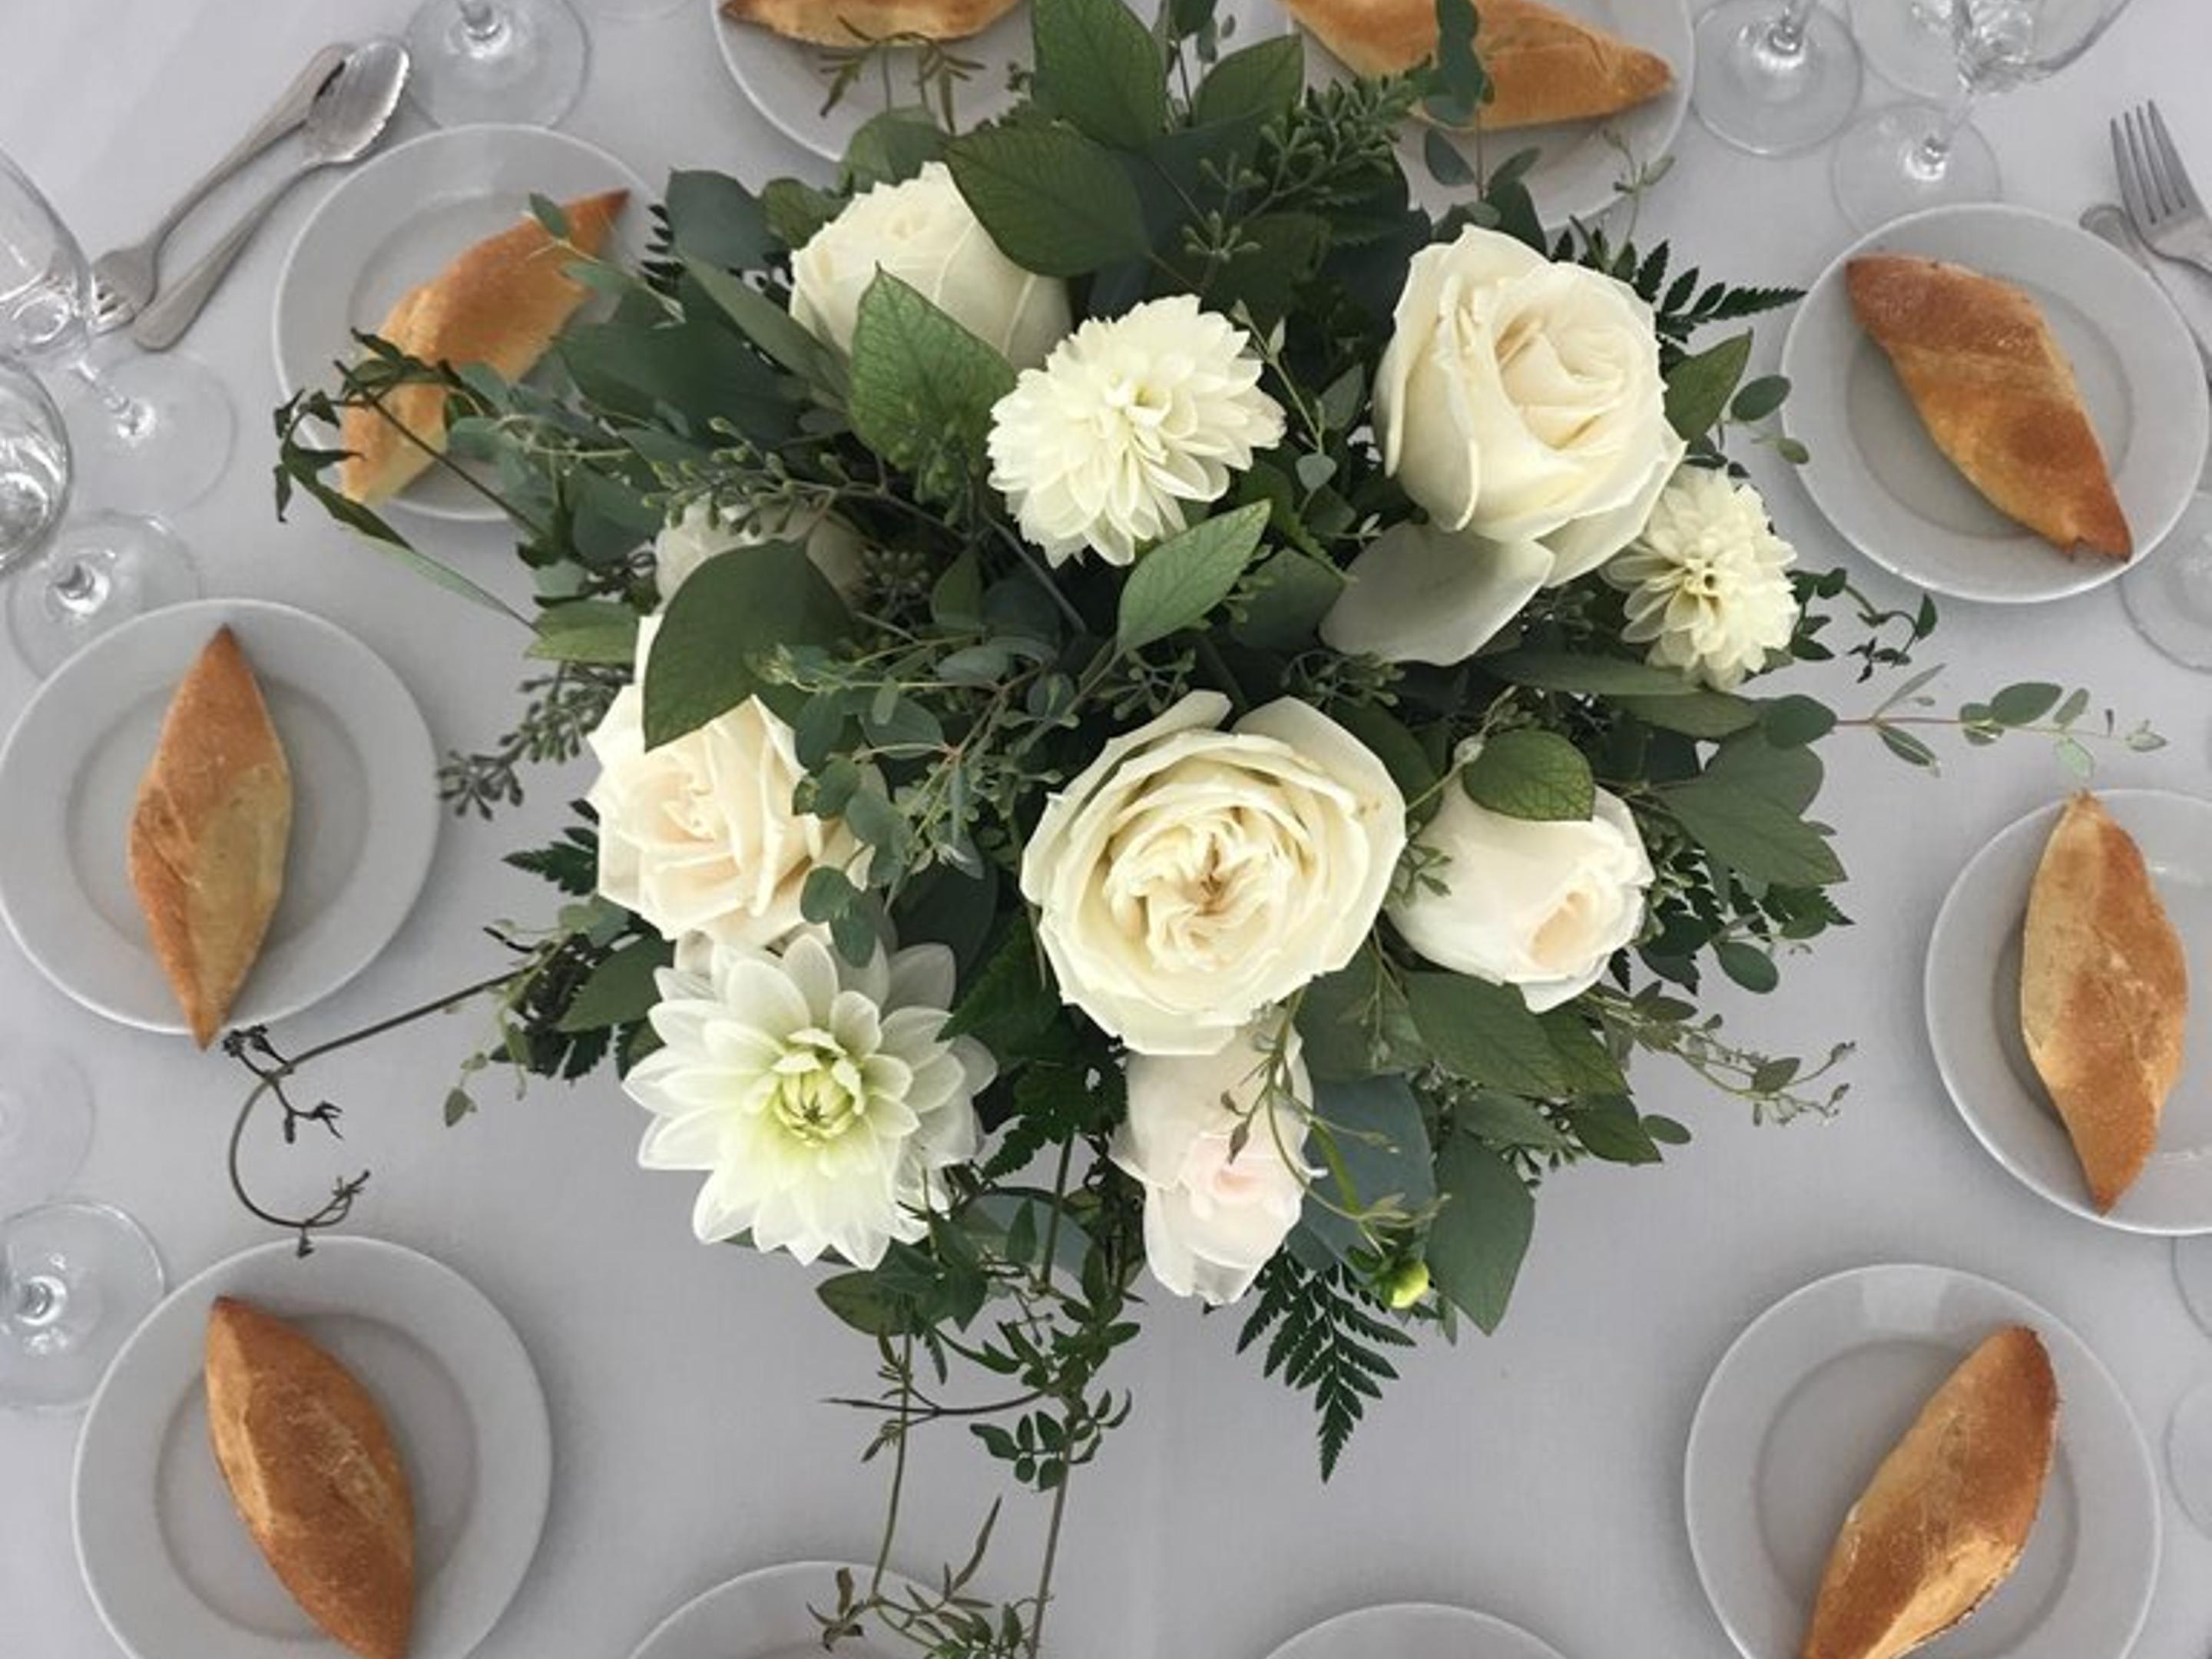 Lovingly Fishkill Wedding top view Centerpiece with white roses and beautiful greenery